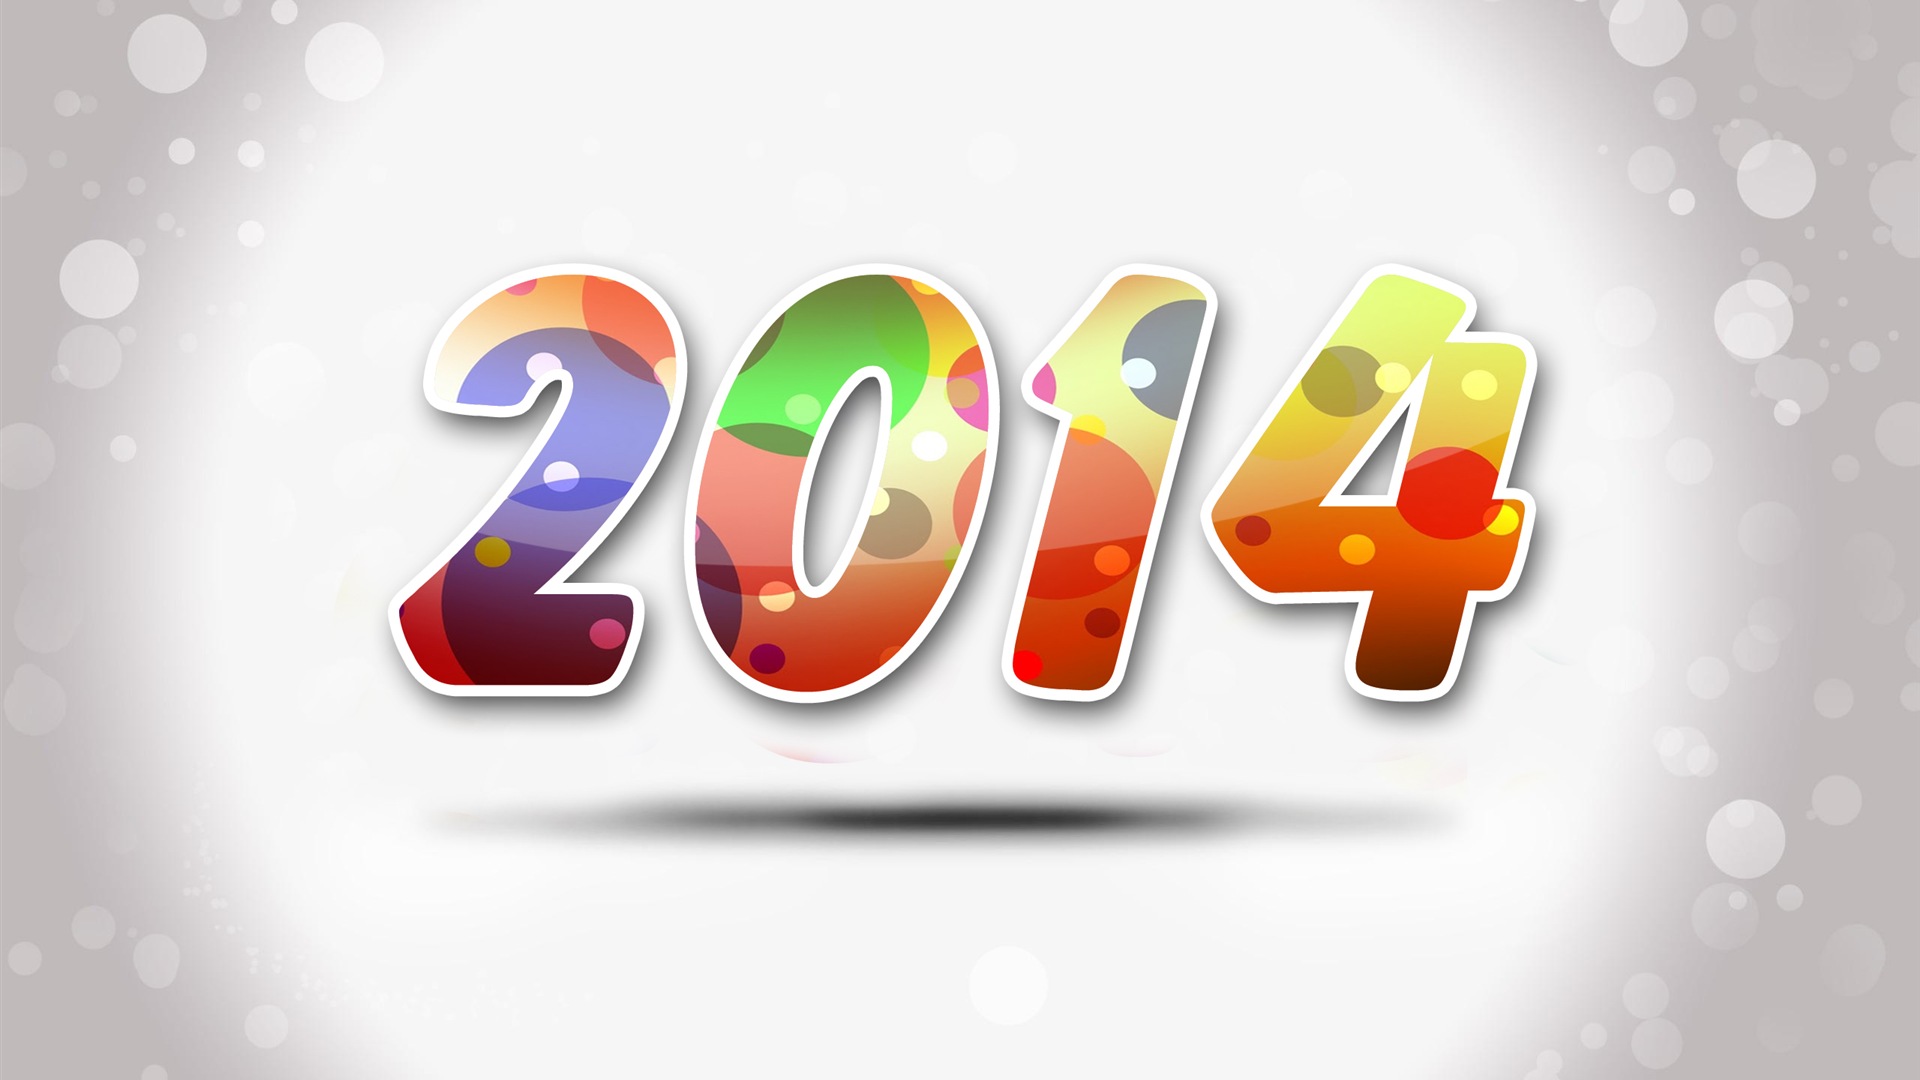 2014 New Year Theme HD Wallpapers (2) #17 - 1920x1080